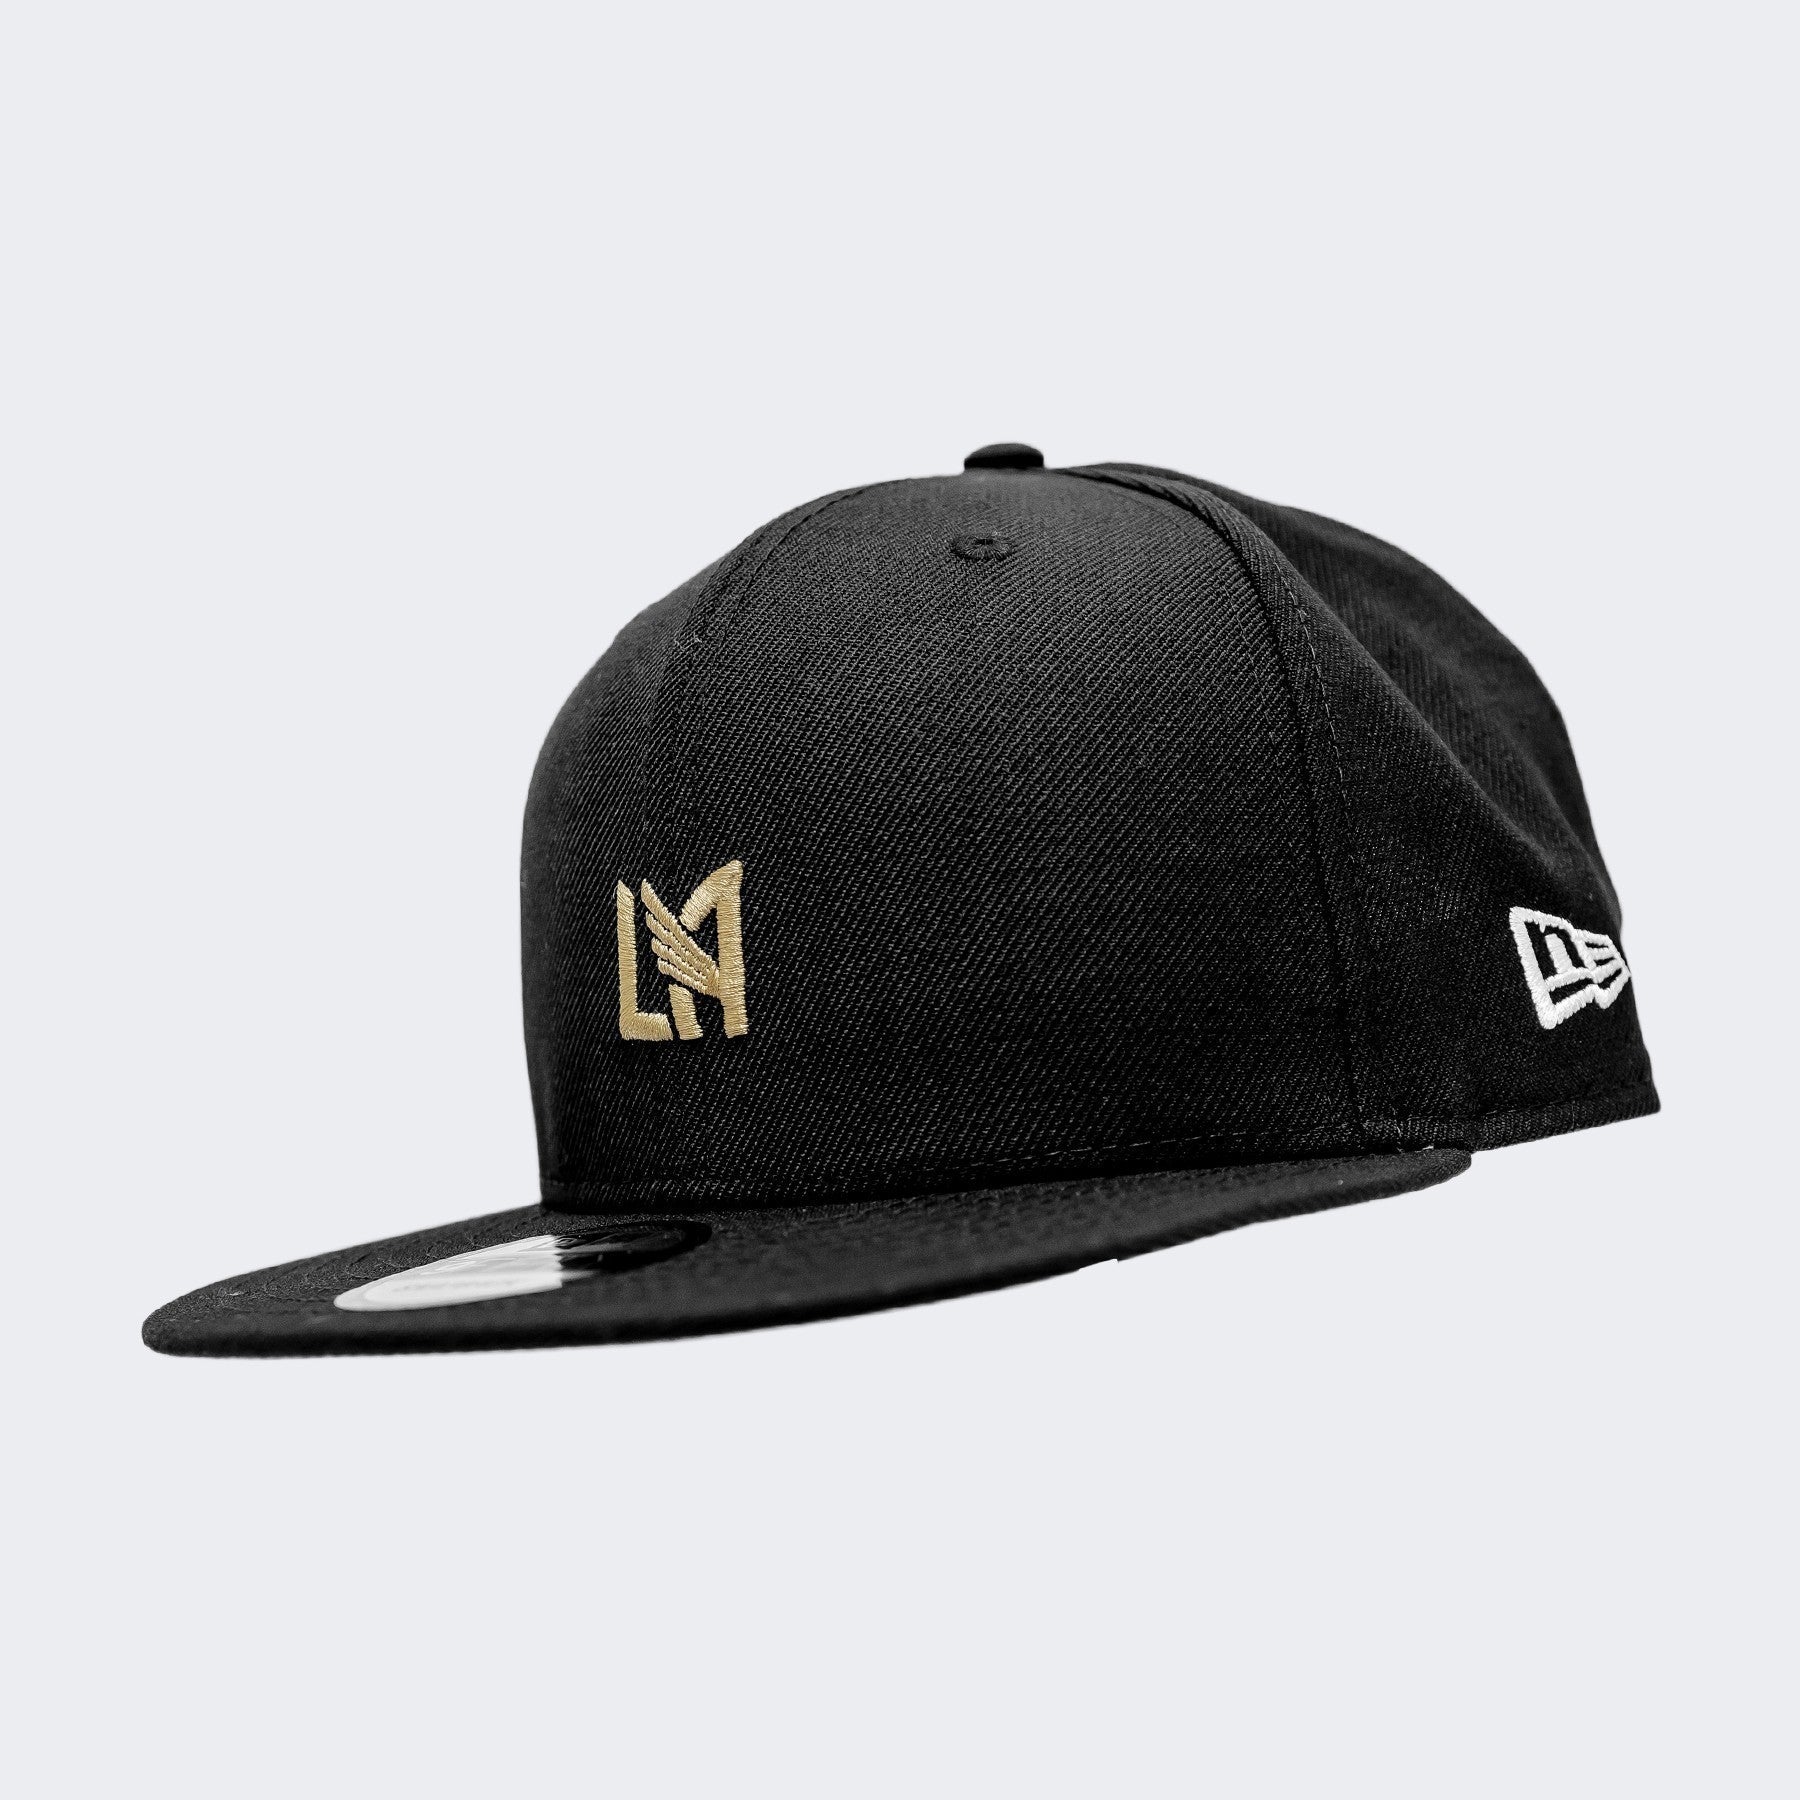 LAFC 5950 Fitted - Black